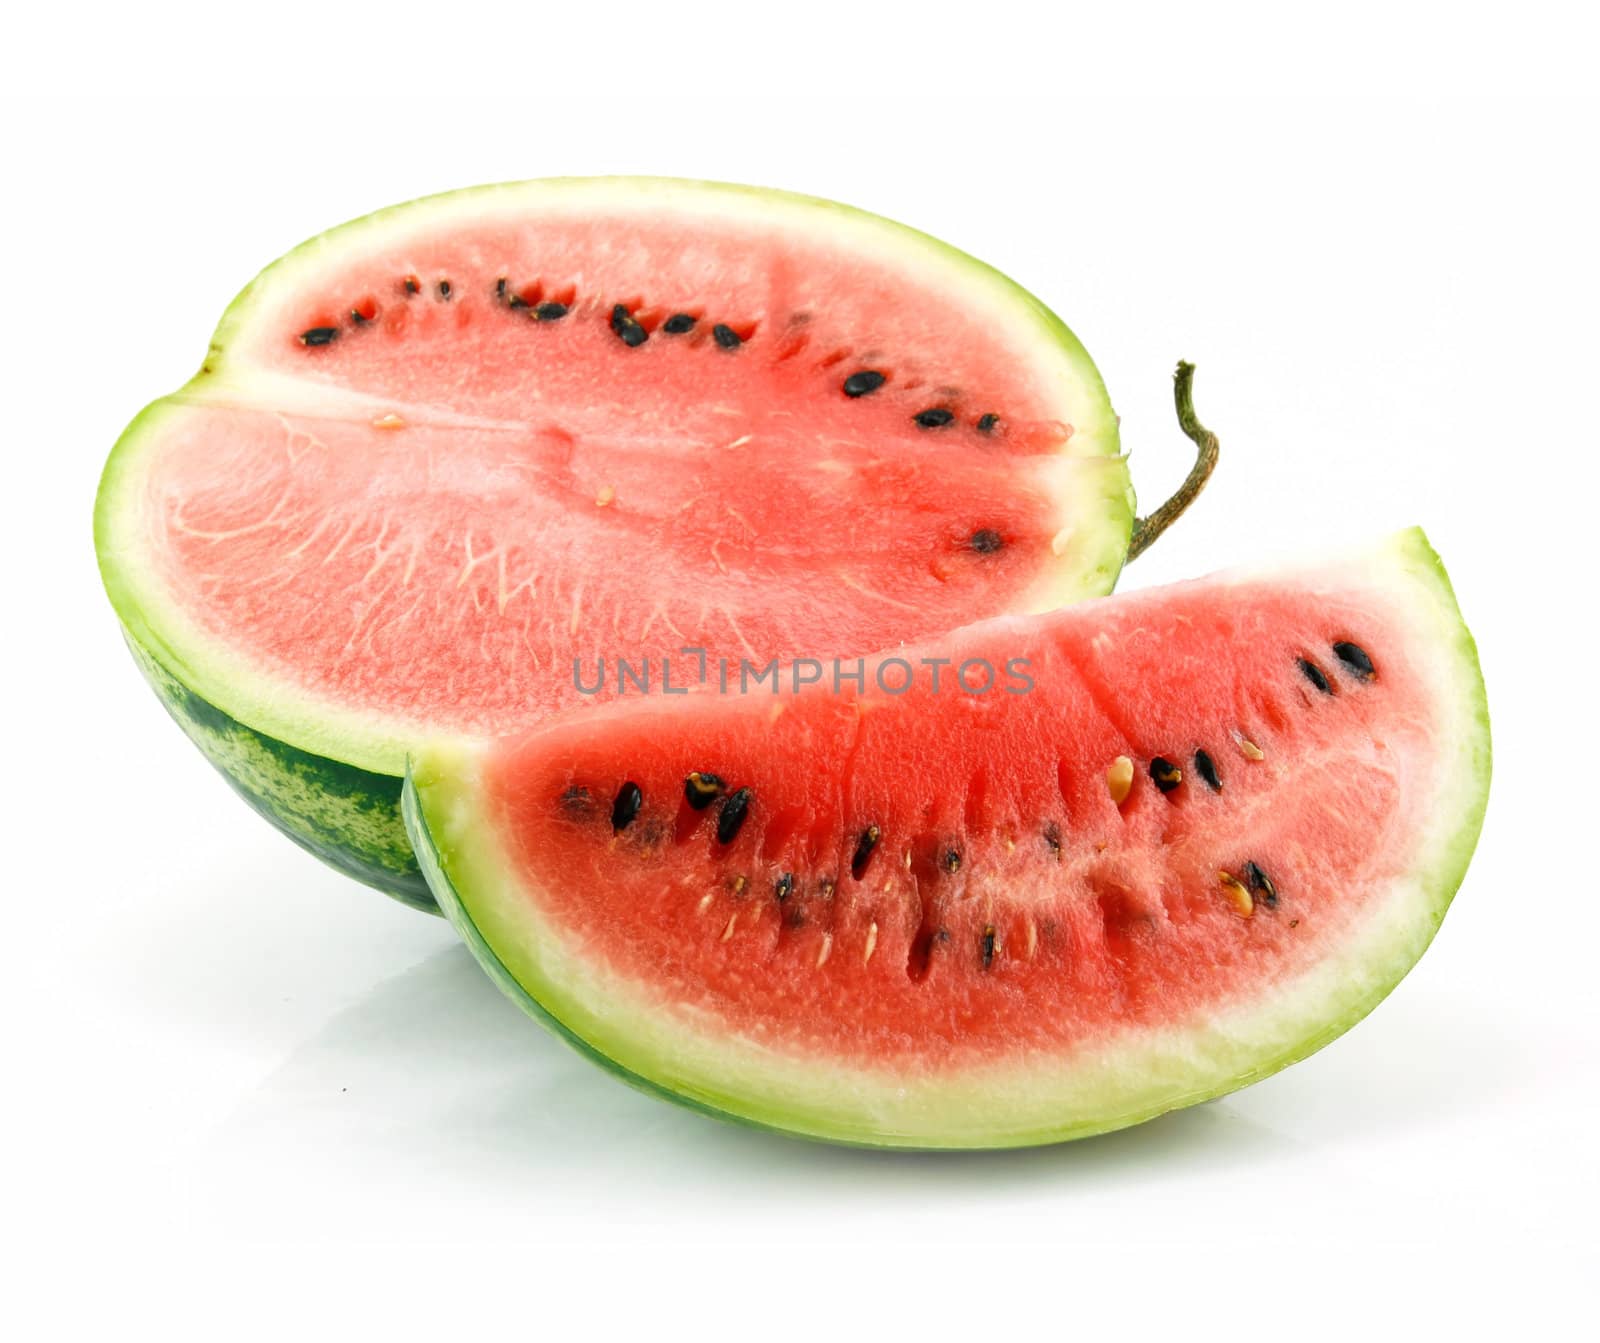 Half and Section of Ripe Sliced Green Watermelon Isolated on Whi by alphacell